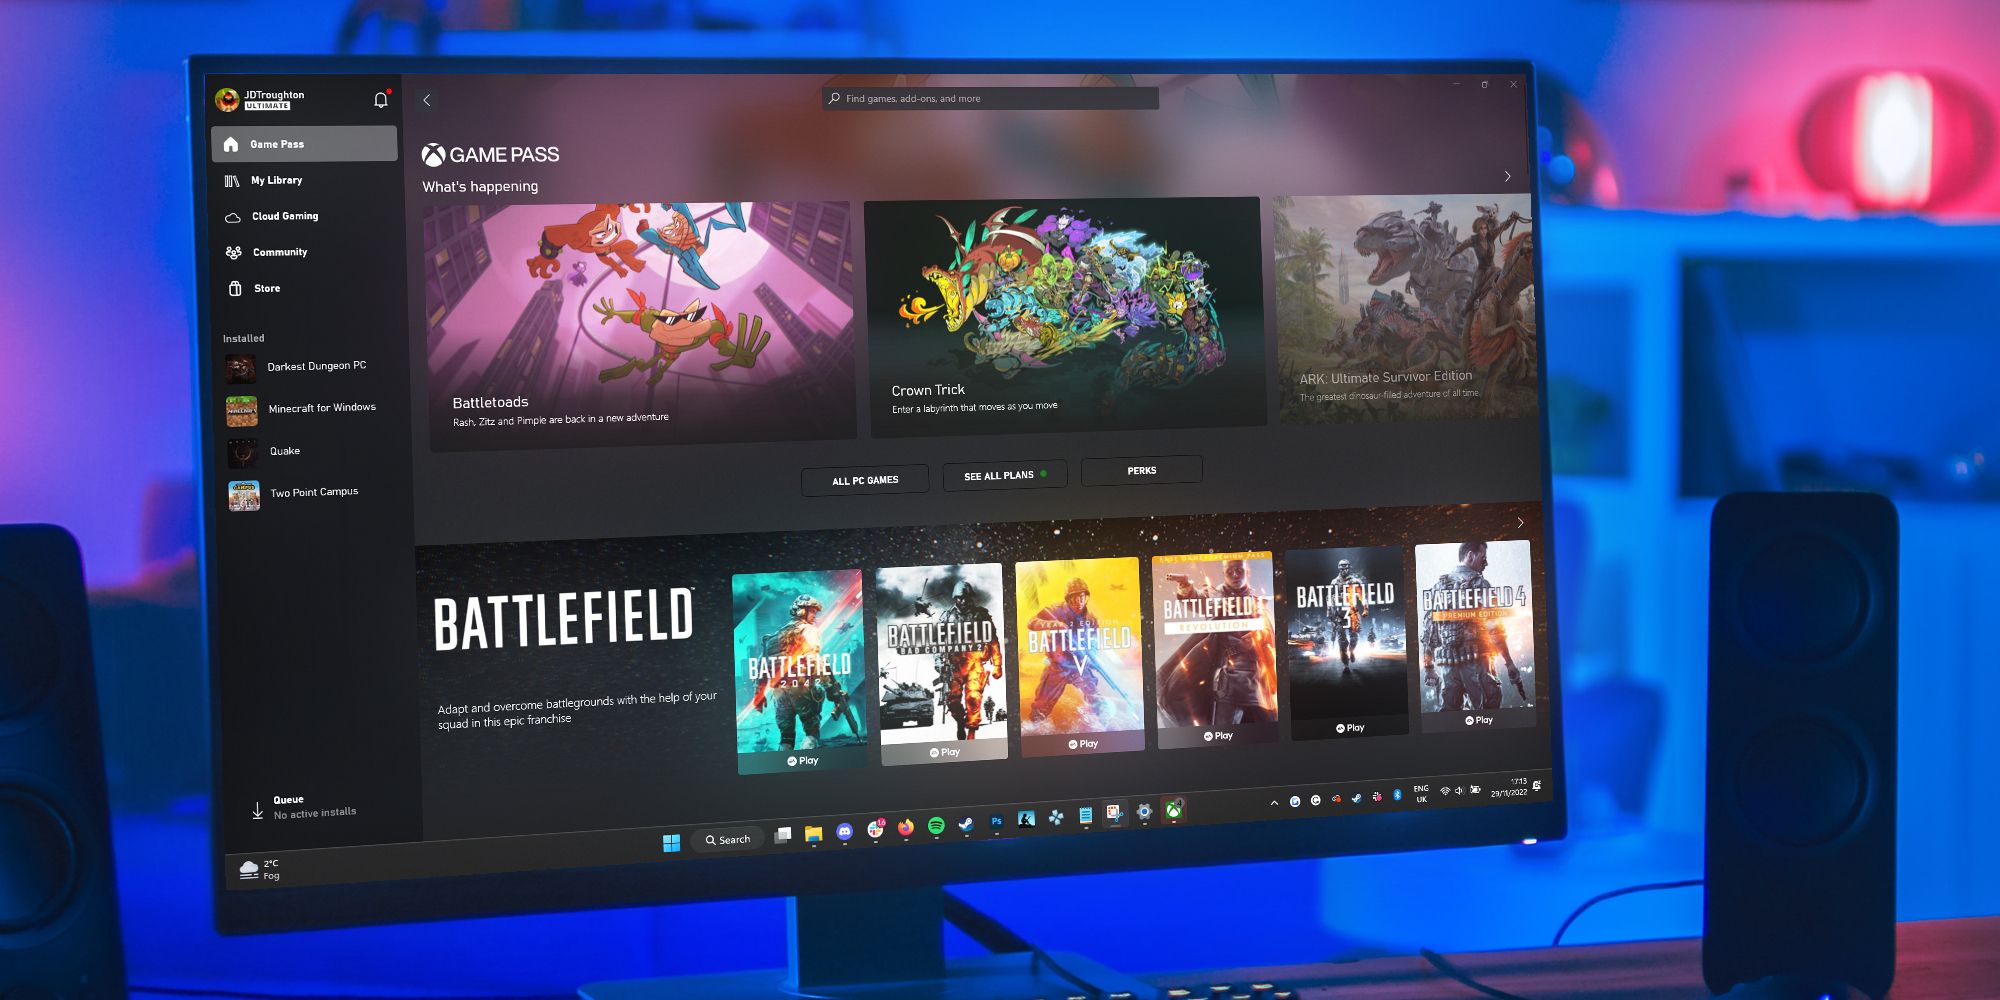 How To Install Games With Game Pass For PC